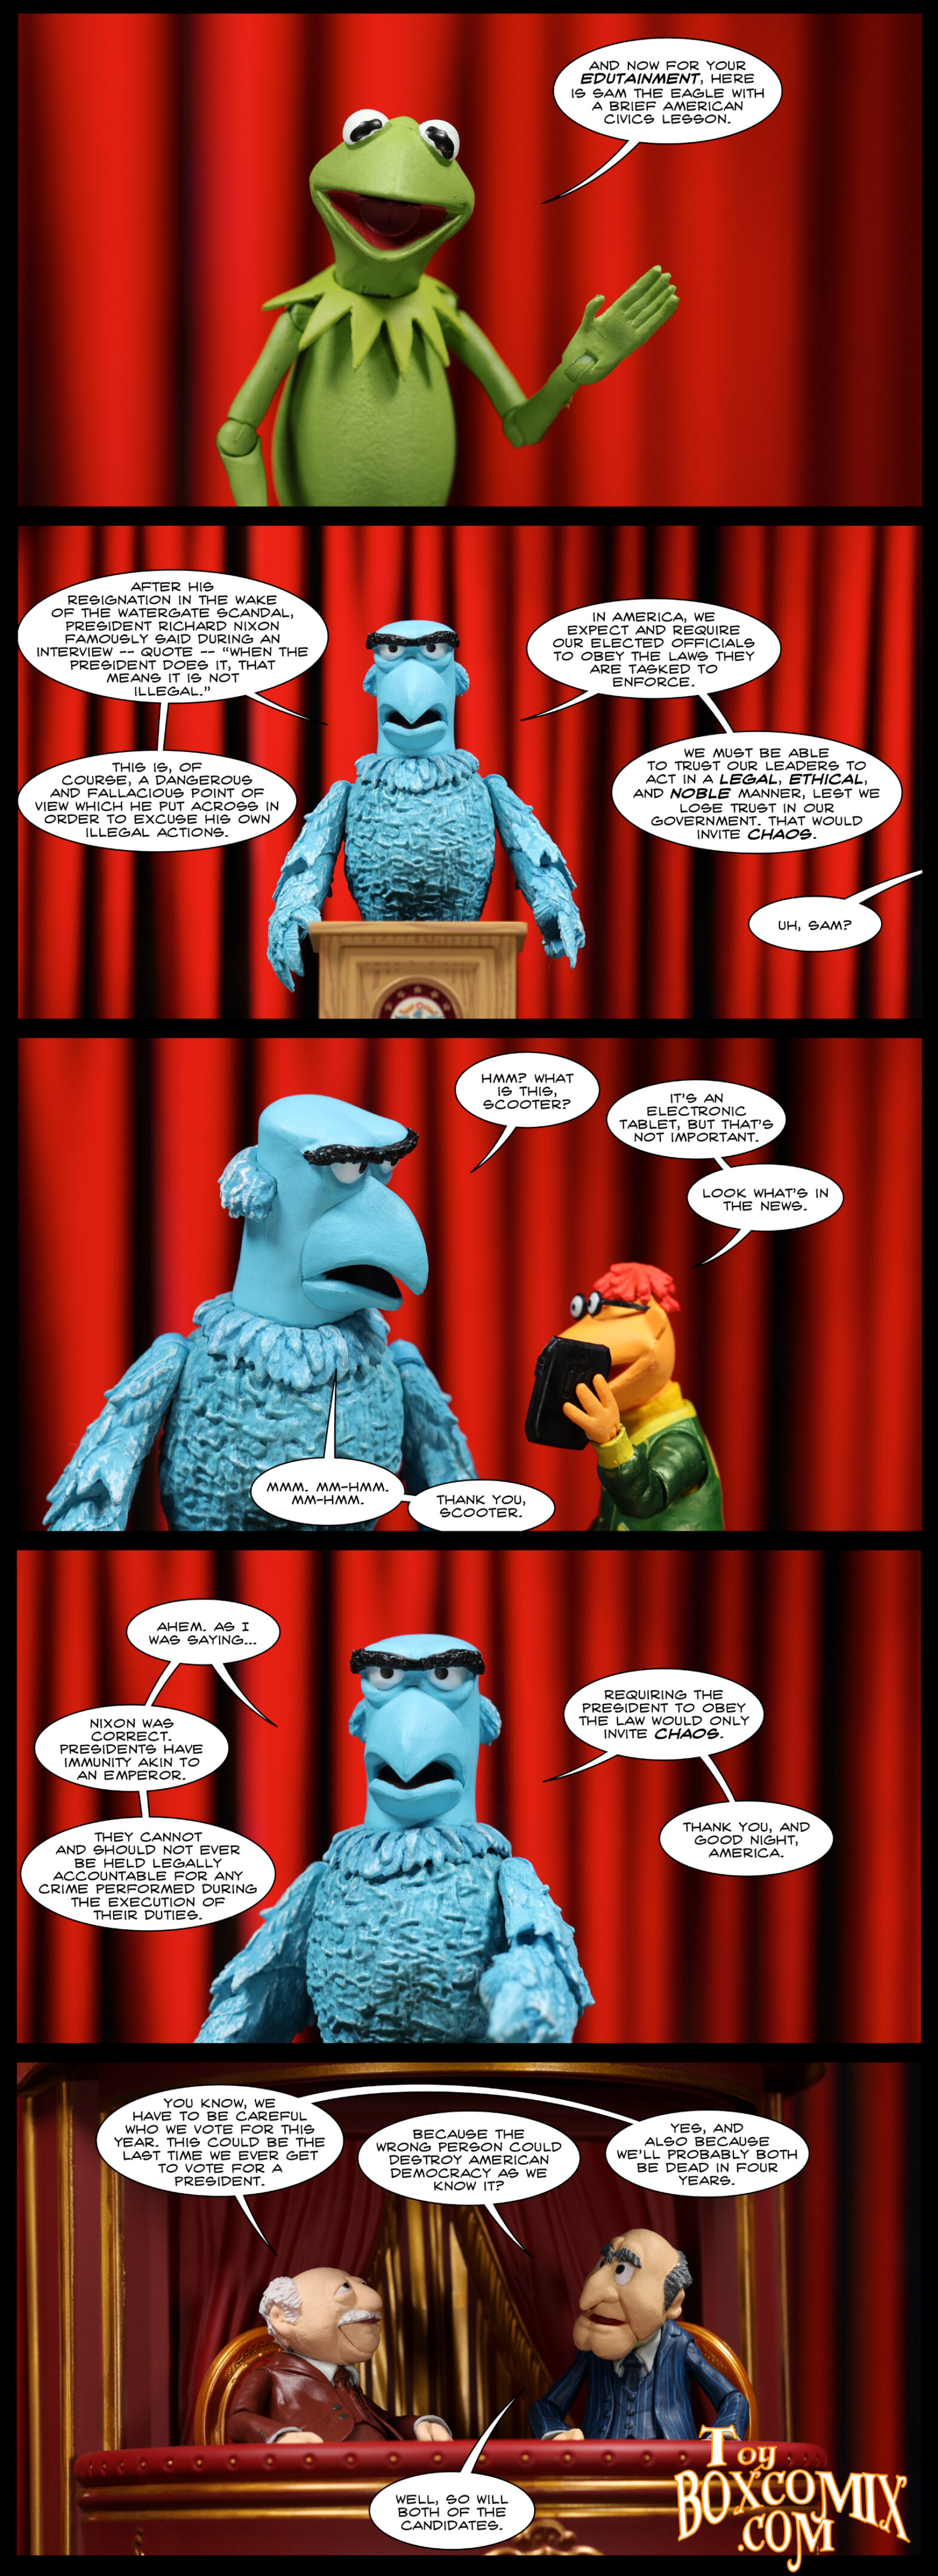 Location: Red Curtain Panel 1: Kermit the Frog: “And now for your edutainment, here is Sam the Eagle with a brief American civics lesson.” 2: Sam: “After his resignation in the wake of the Watergate scandal, President Richard Nixon famously said during an interview – quote – ‘when the president does it, that means it is not illegal.’ This is, of course, a dangerous and fallacious point of view which he put across in order to excuse his own illegal actions. In America, we expect and require our elected officials to obey the laws they are tasked to enforce. We must be able to trust our leaders to act in a legal, ethical, and noble manner, lest we lost trust in our government. That would cause chaos.” Off-panel: “Uh, Sam?” 3: Sam: “Hmm? What is this, Scooter?” Scooter, holding up a tablet: “It’s an electronic tablet, but that’s not important. Look what’s in the news.” Sam: “Mmm. Mm-hmm. Mm-hmm. Thank you, Scooter.” 4: Sam: “Ahem. As I was saying…Nixon was correct. Presidents have immunity akin to an emperor. They cannot and should not ever be held legally accountable for any crime performed during the execution of their duties. Requiring the president to obey the law would only invite chaos. Thank you, and good night, America.” 5: Location: balcony. Waldorf: “You know, we have to be careful who we vote for this year. This could be the last time we ever get to vote for a president.” Statler: “Because the wrong person could destroy American democracy as we know it?” Waldorf: “Yes, and also because we’ll probably both be dead in four years.” Statler: “Well, so will both of the candidates.”